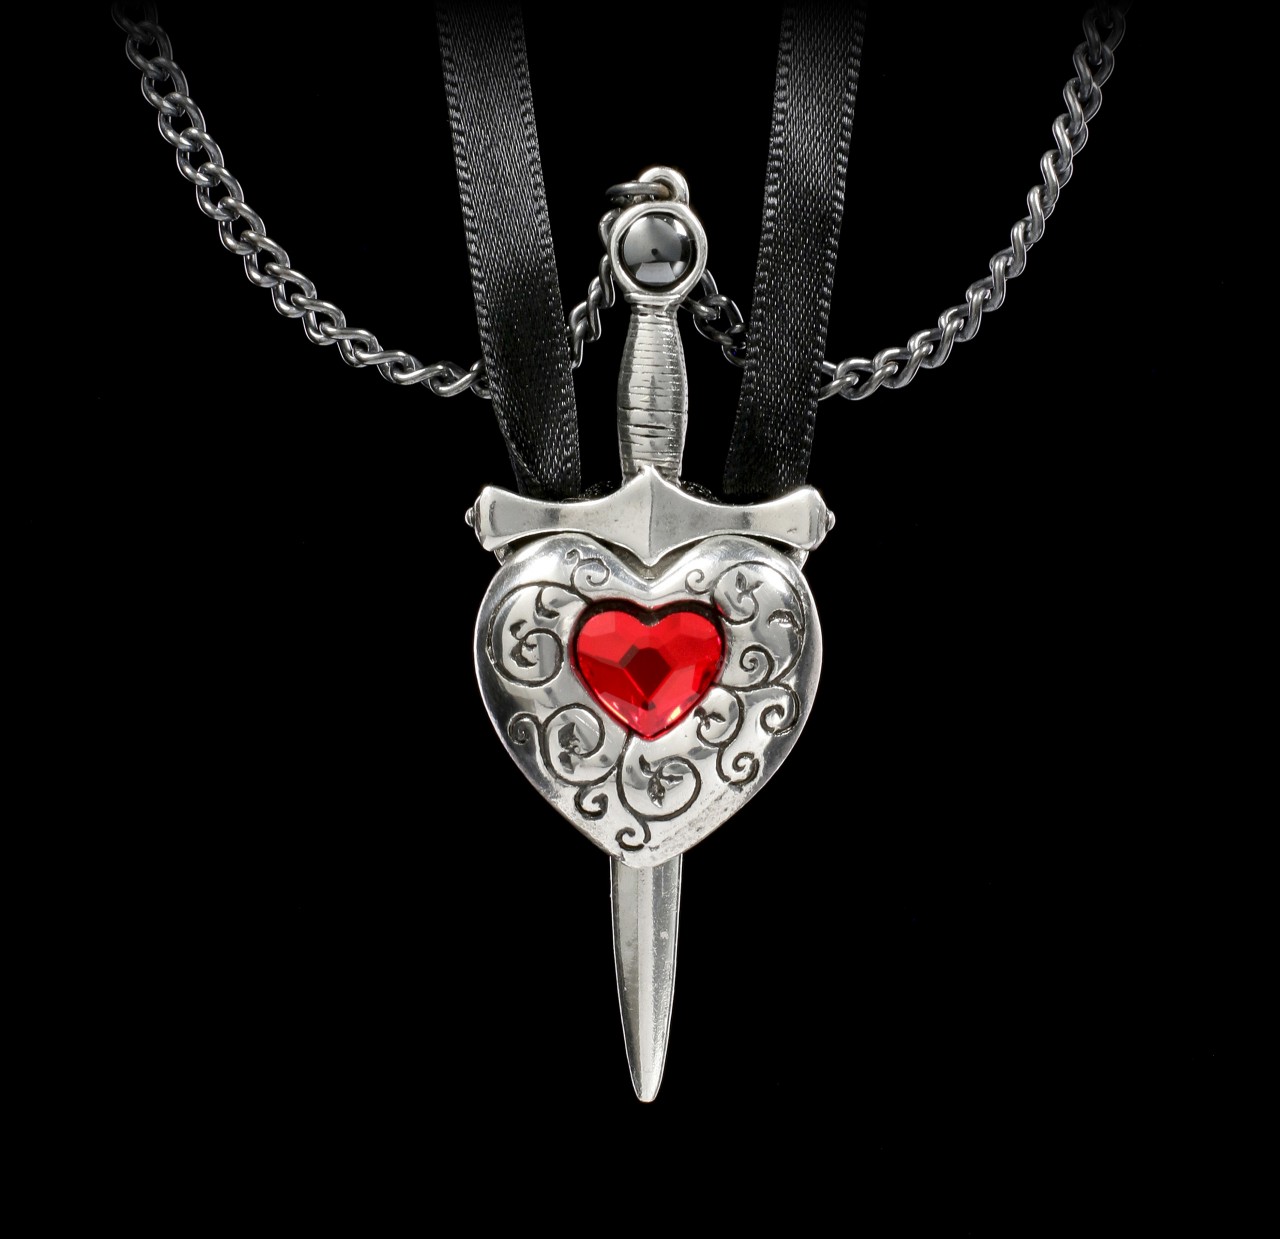 Love is King - Couples Necklace